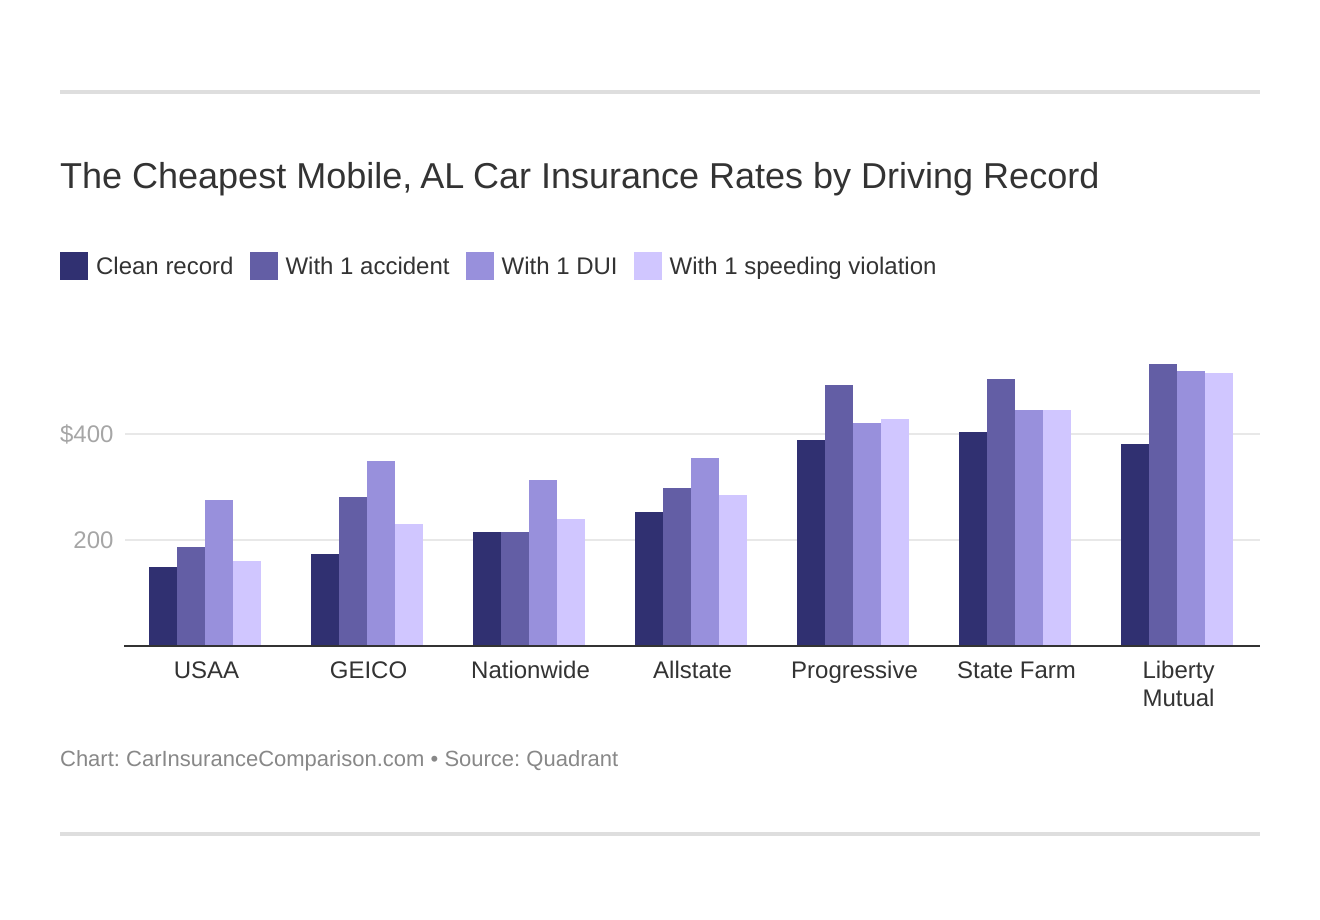 The Cheapest Mobile, AL Car Insurance Rates by Driving Record